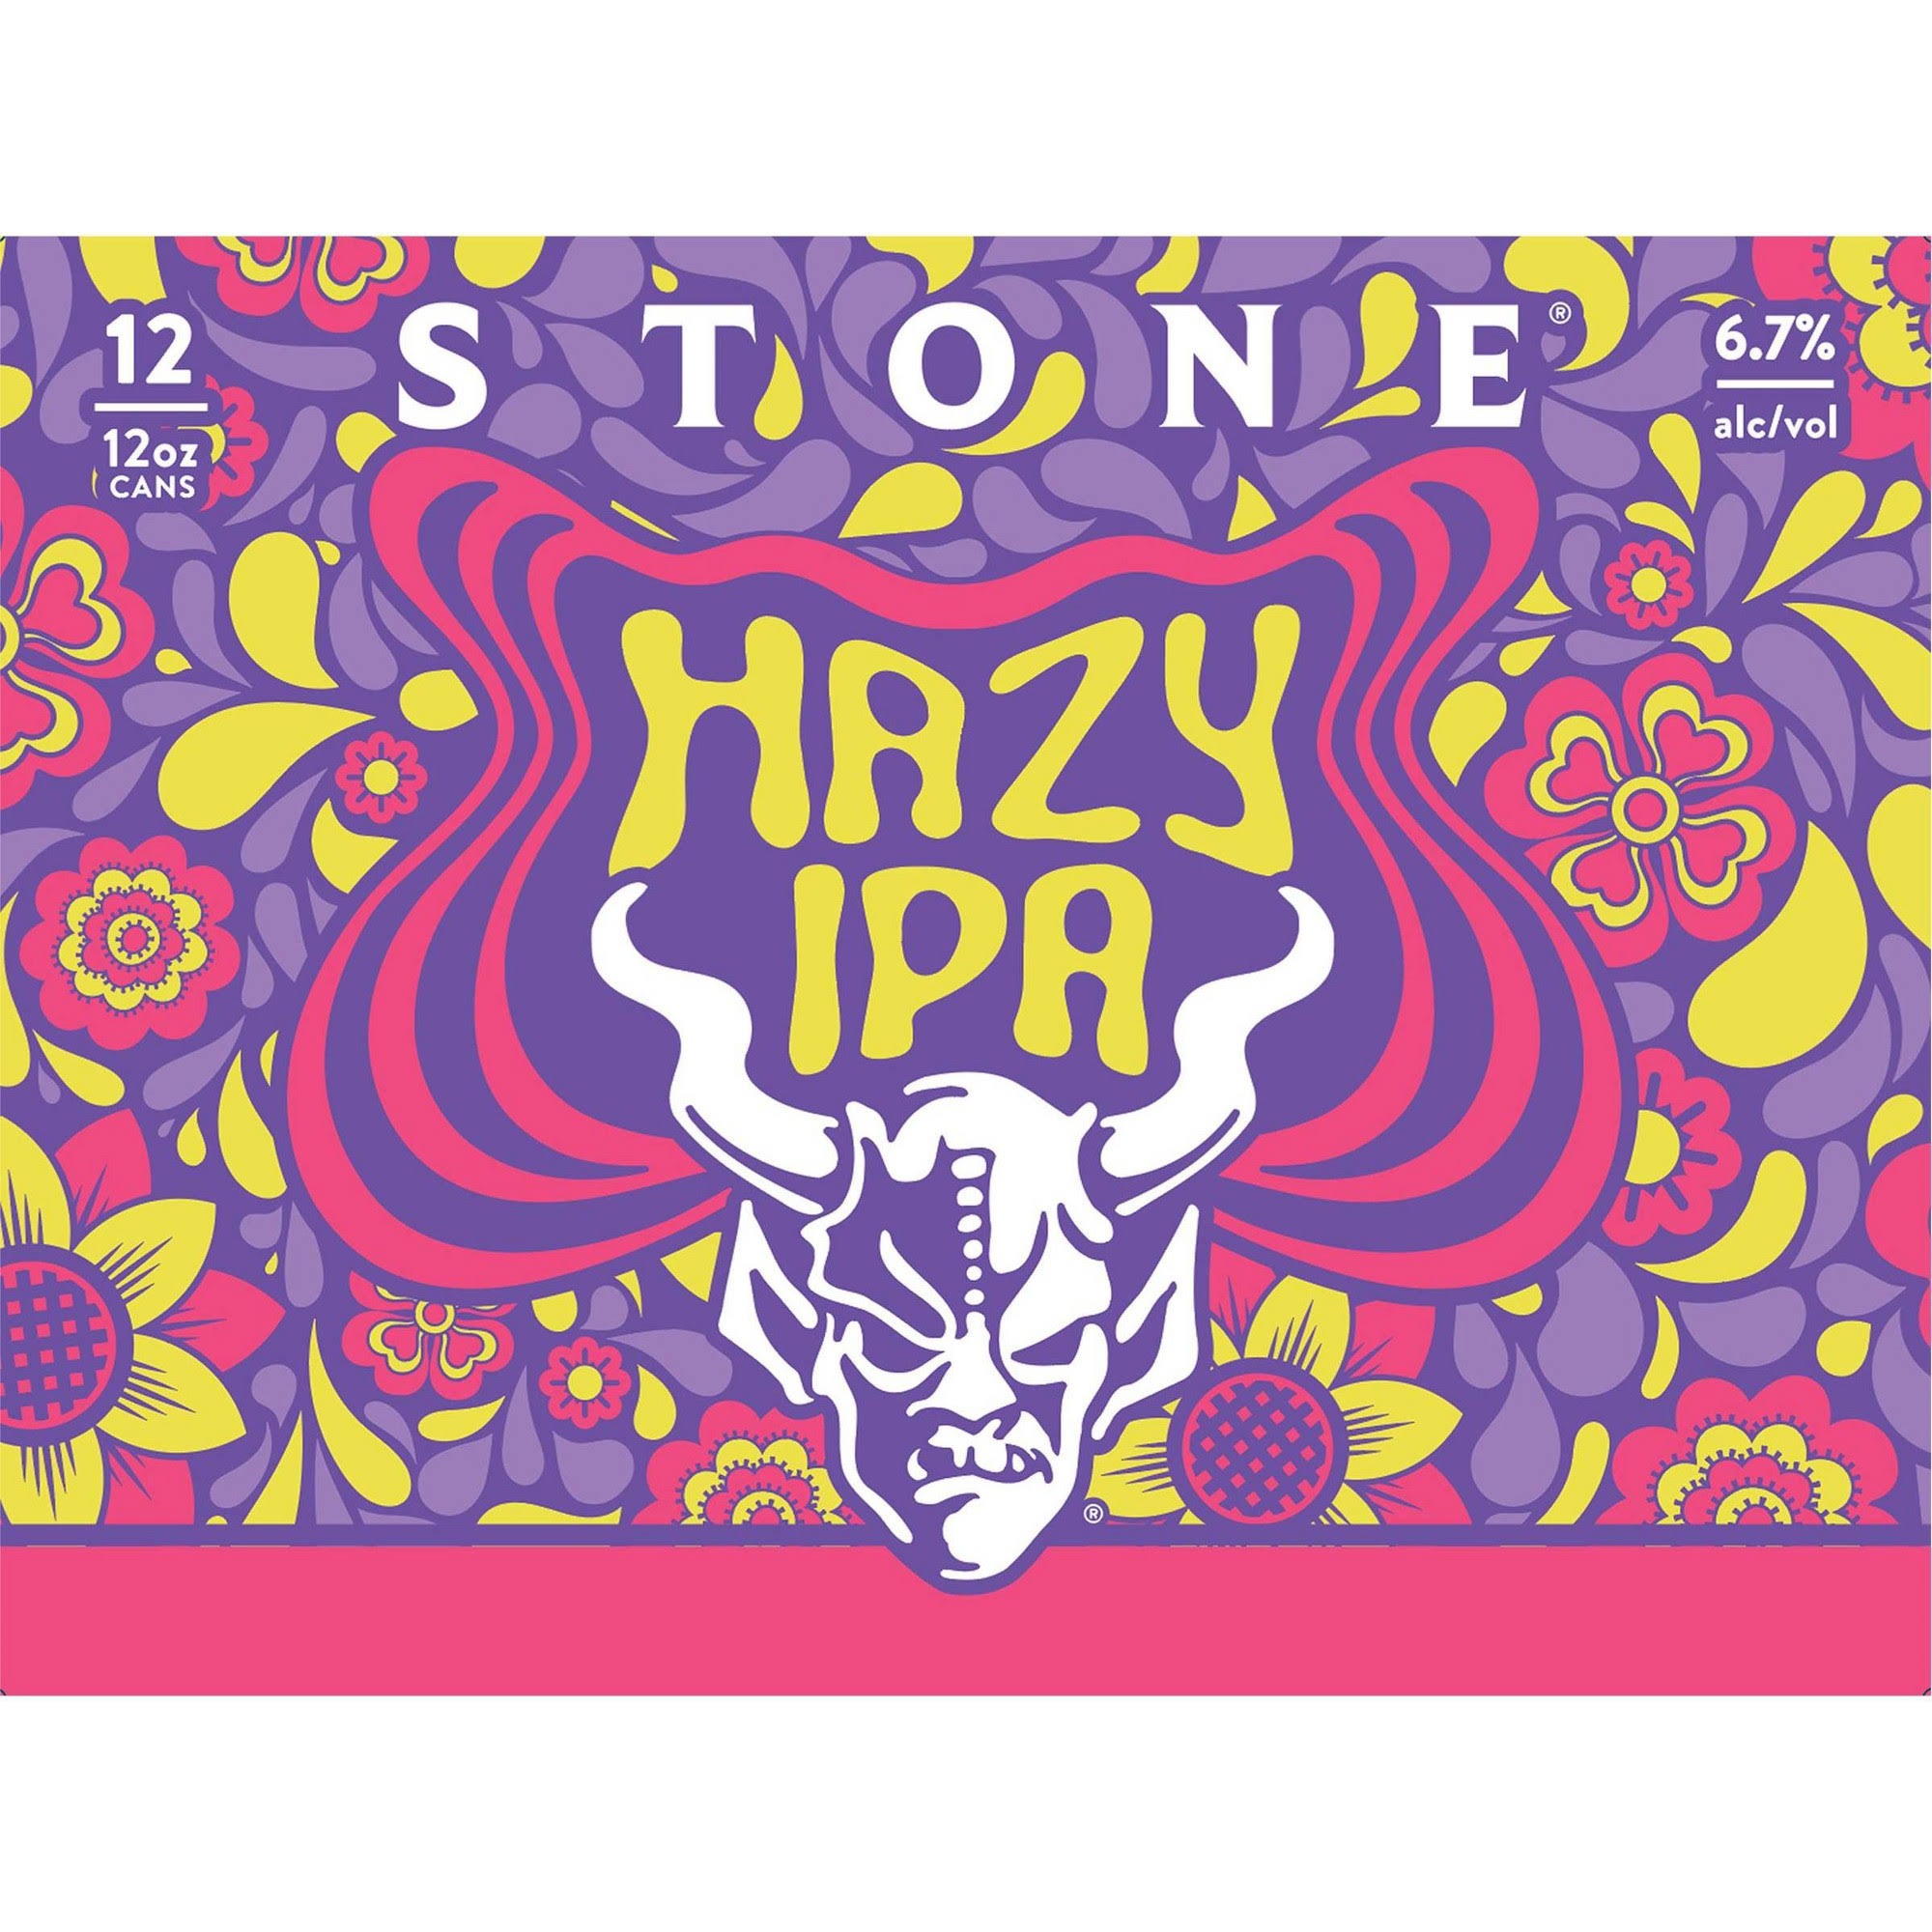 Stone Beer, Hazy IPA - 12 pack, 12 oz cans